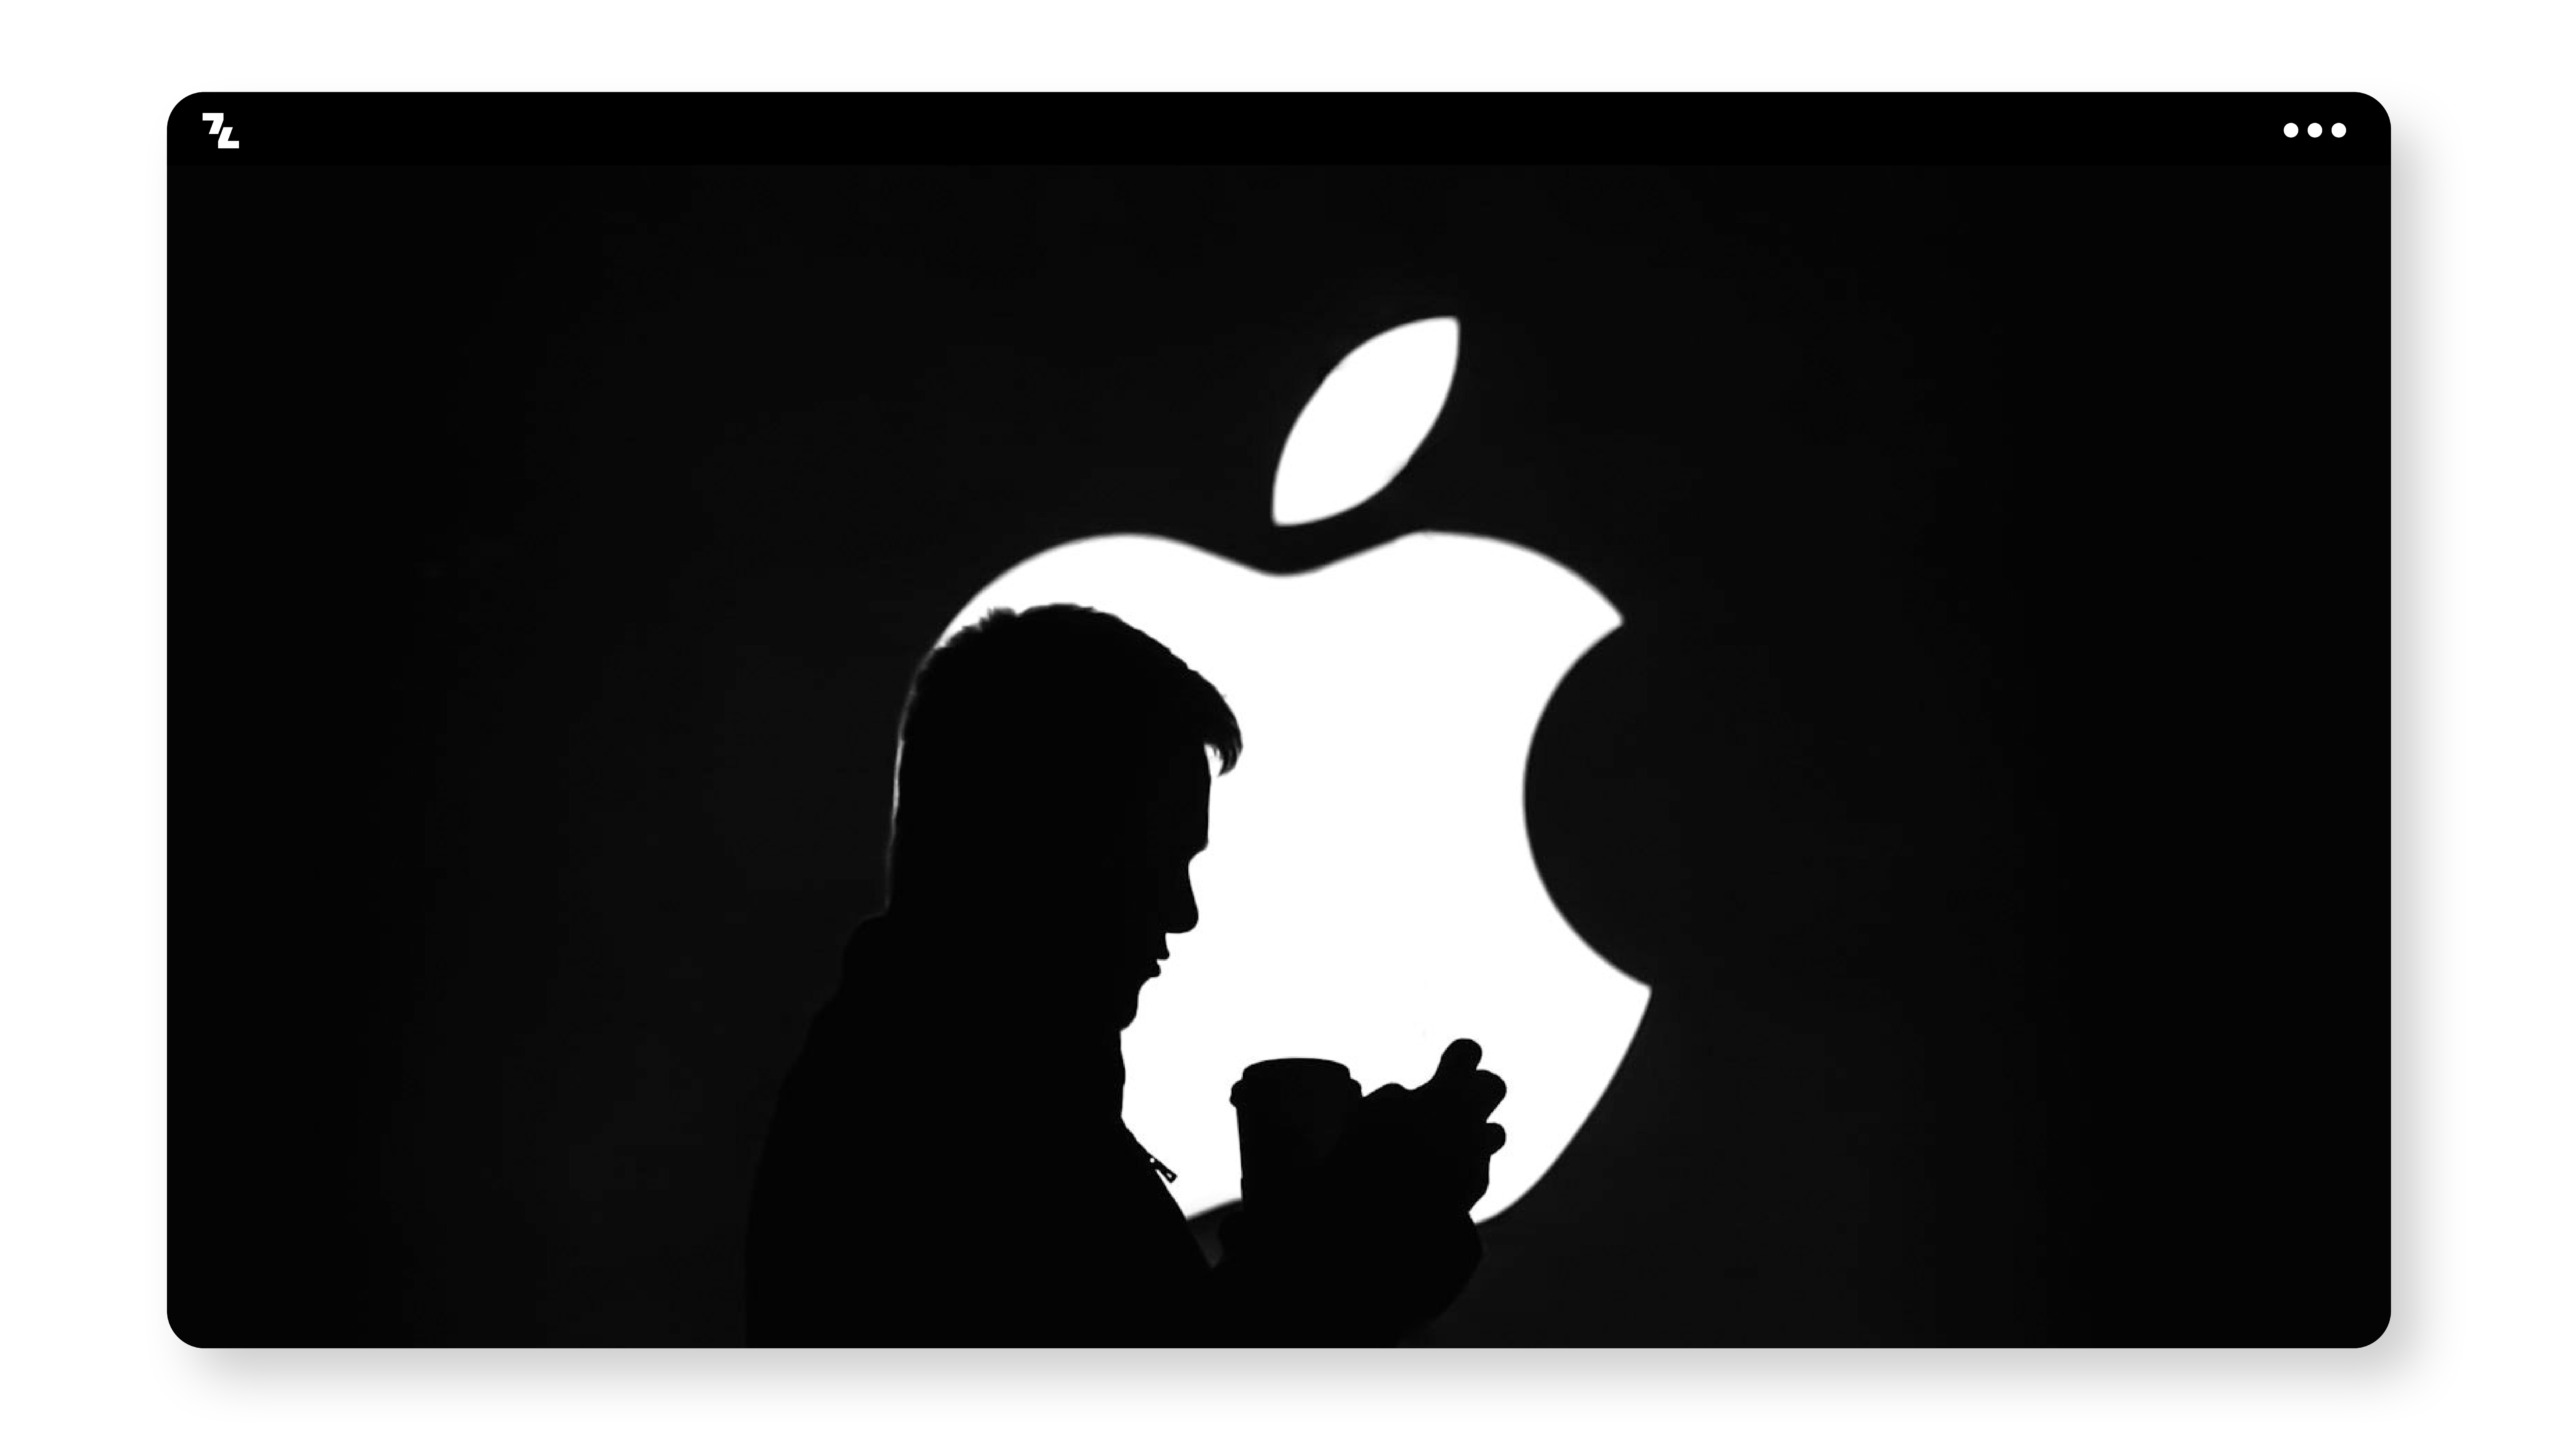 A silhouette of a man holding a phone in front of an apple logo.